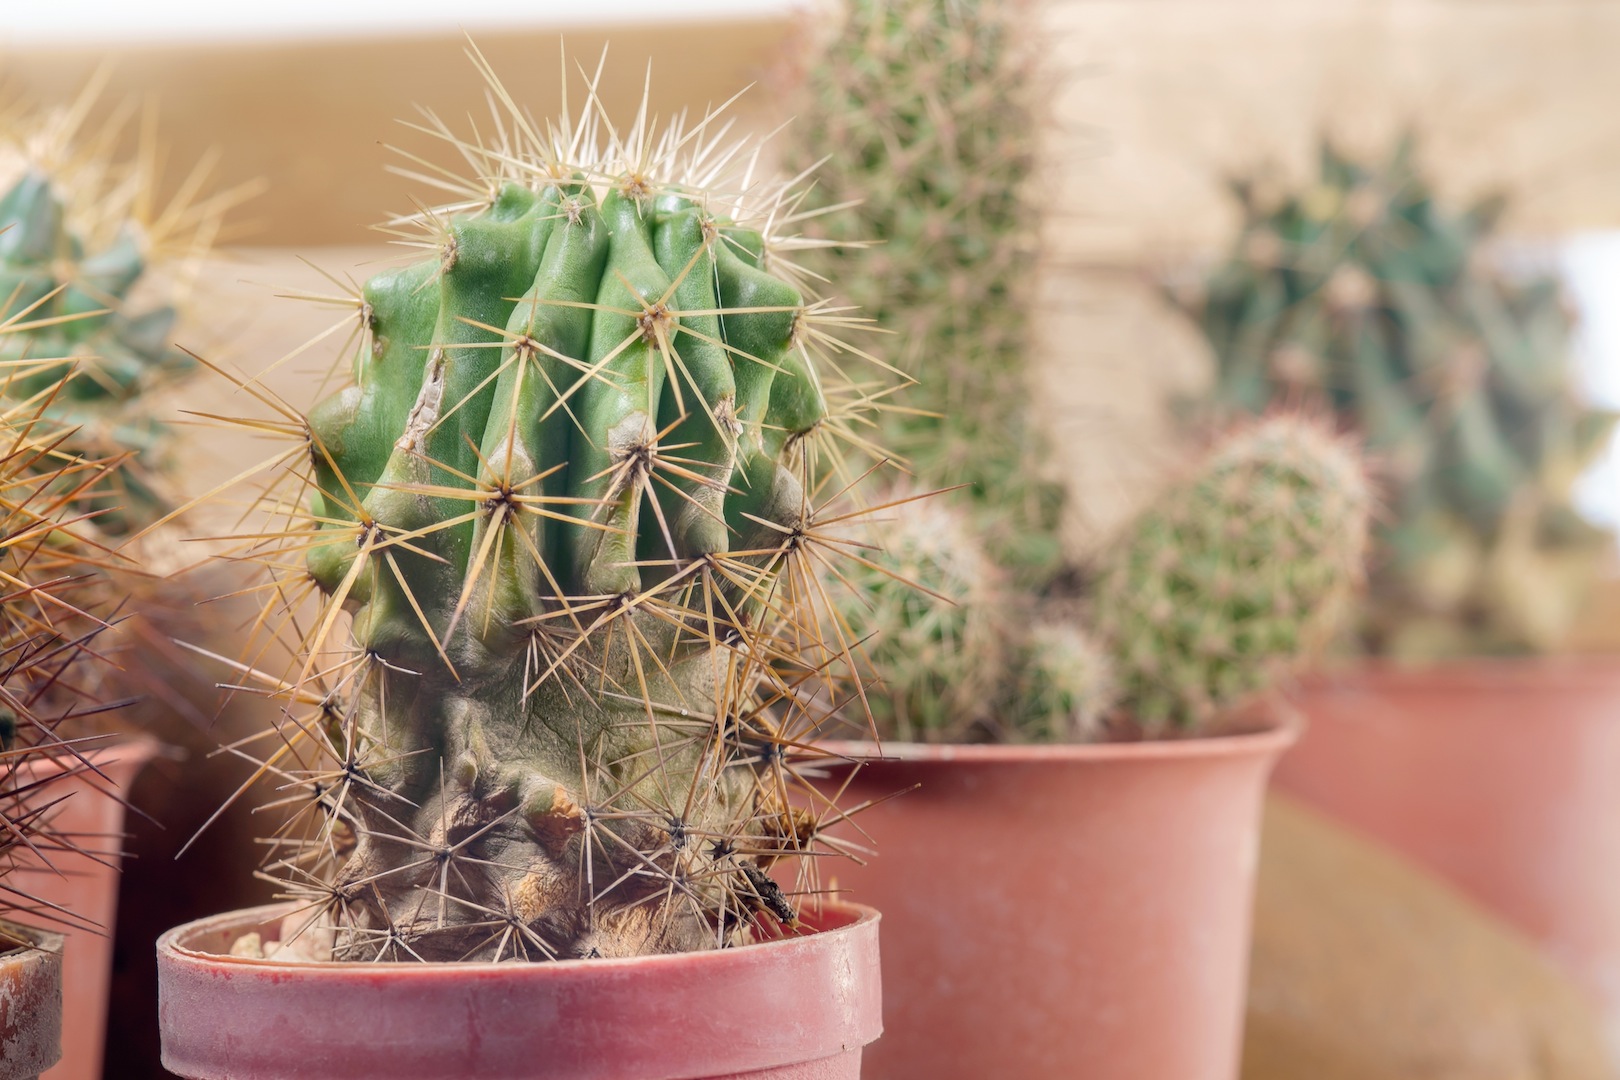 Cacti - what are they and where did they come from?